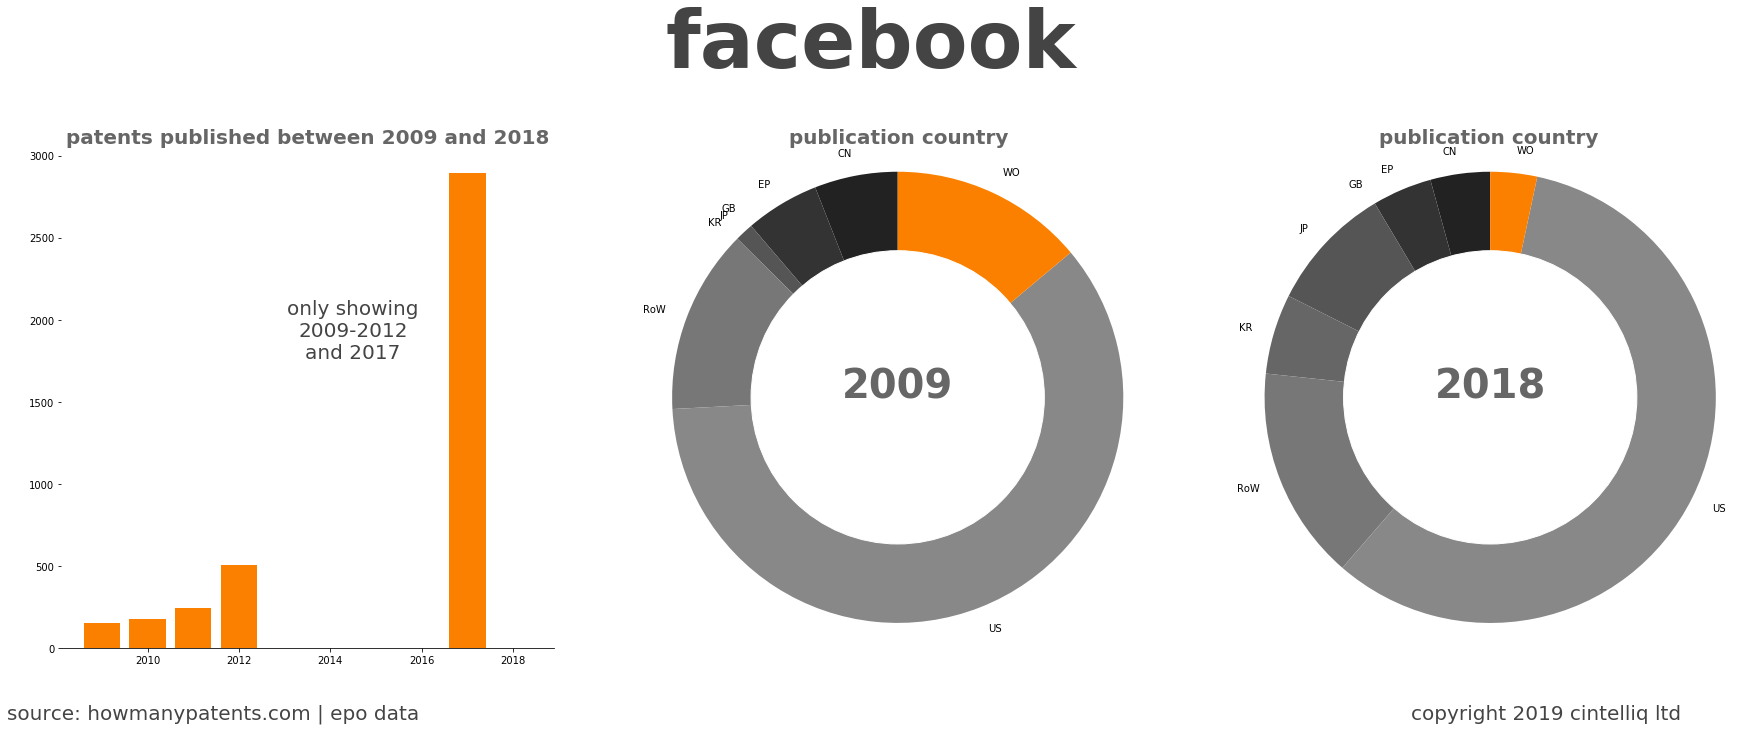 summary of patents for Facebook